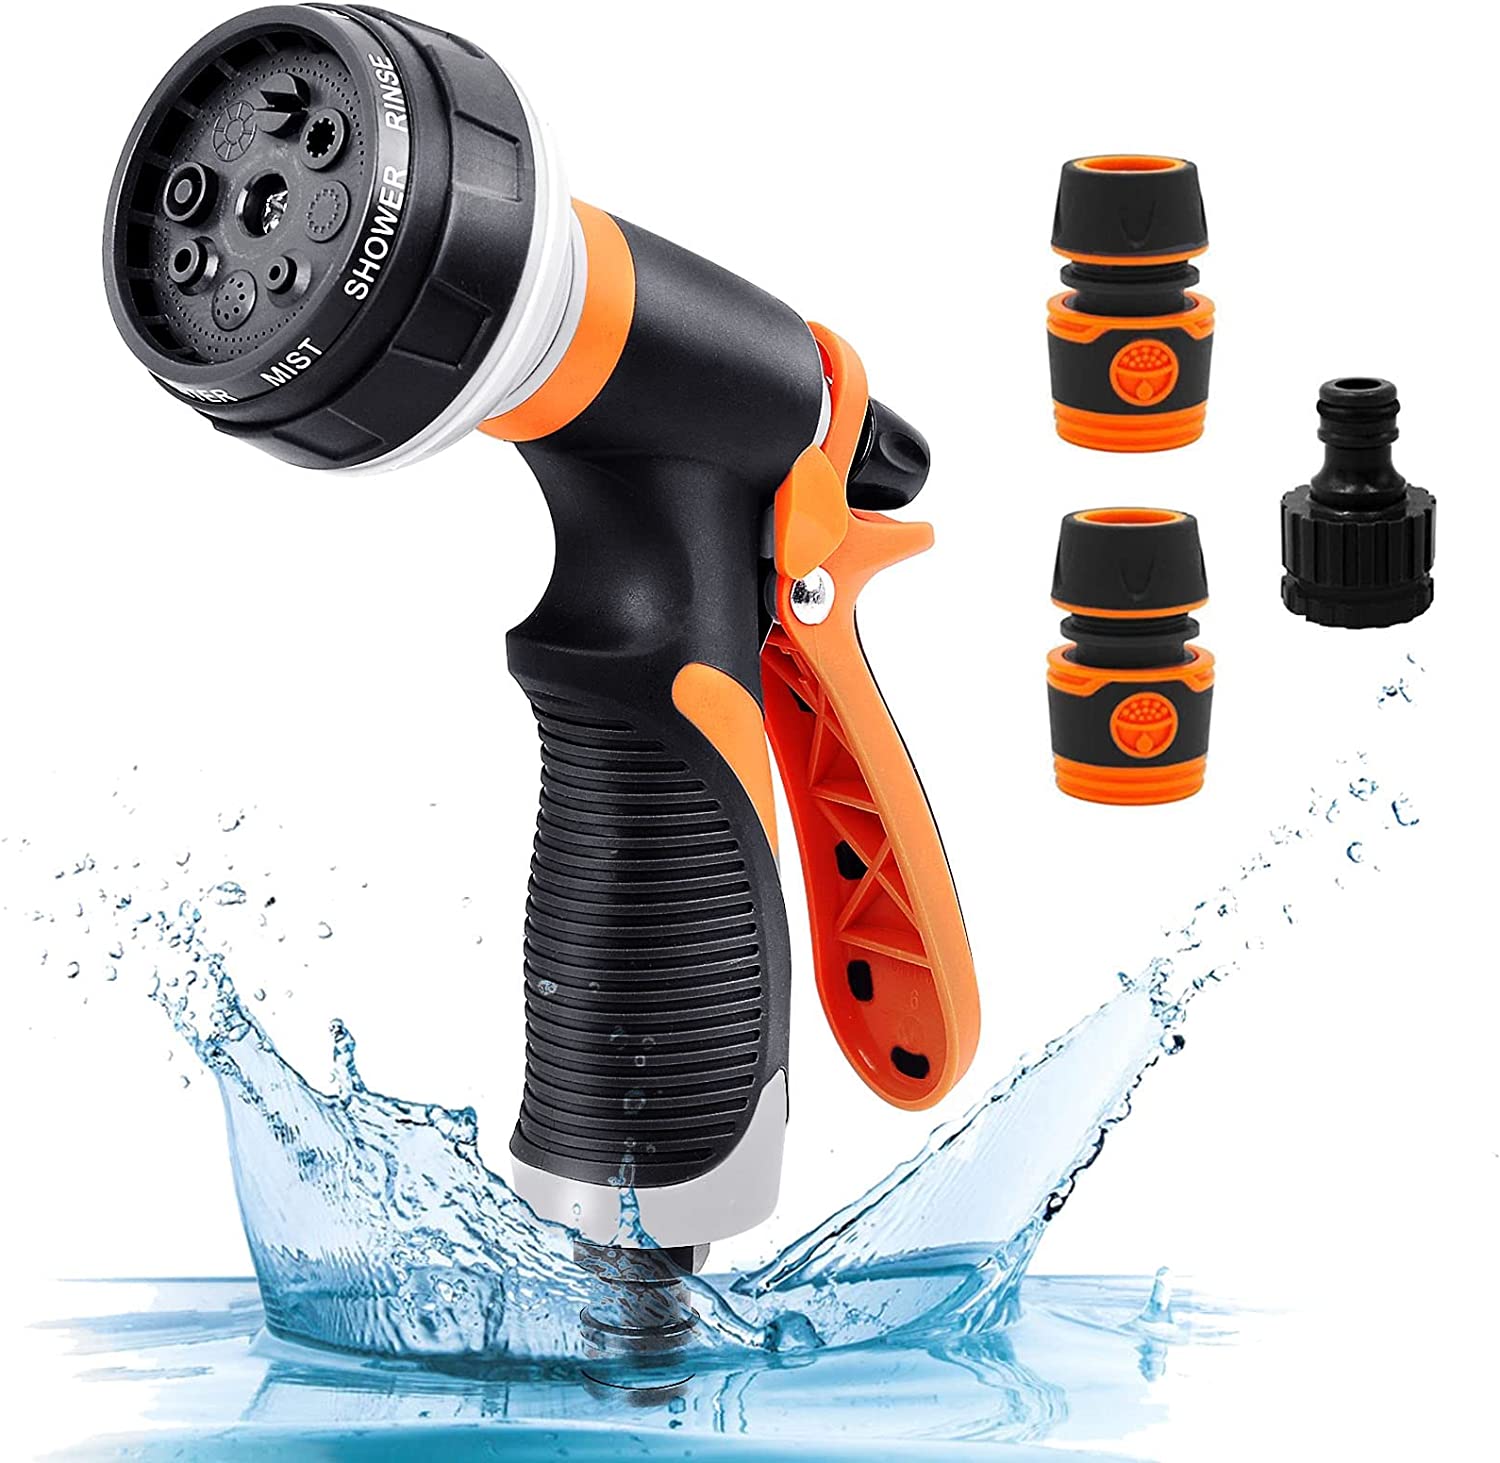 Garden Multi Spray Robust Gun Hose Nozzle 8 Patterns Hose Spray Gun for Watering Plants or Lawns Cleaning Pets Clean Windows（Applicable 1/2 "Hose)